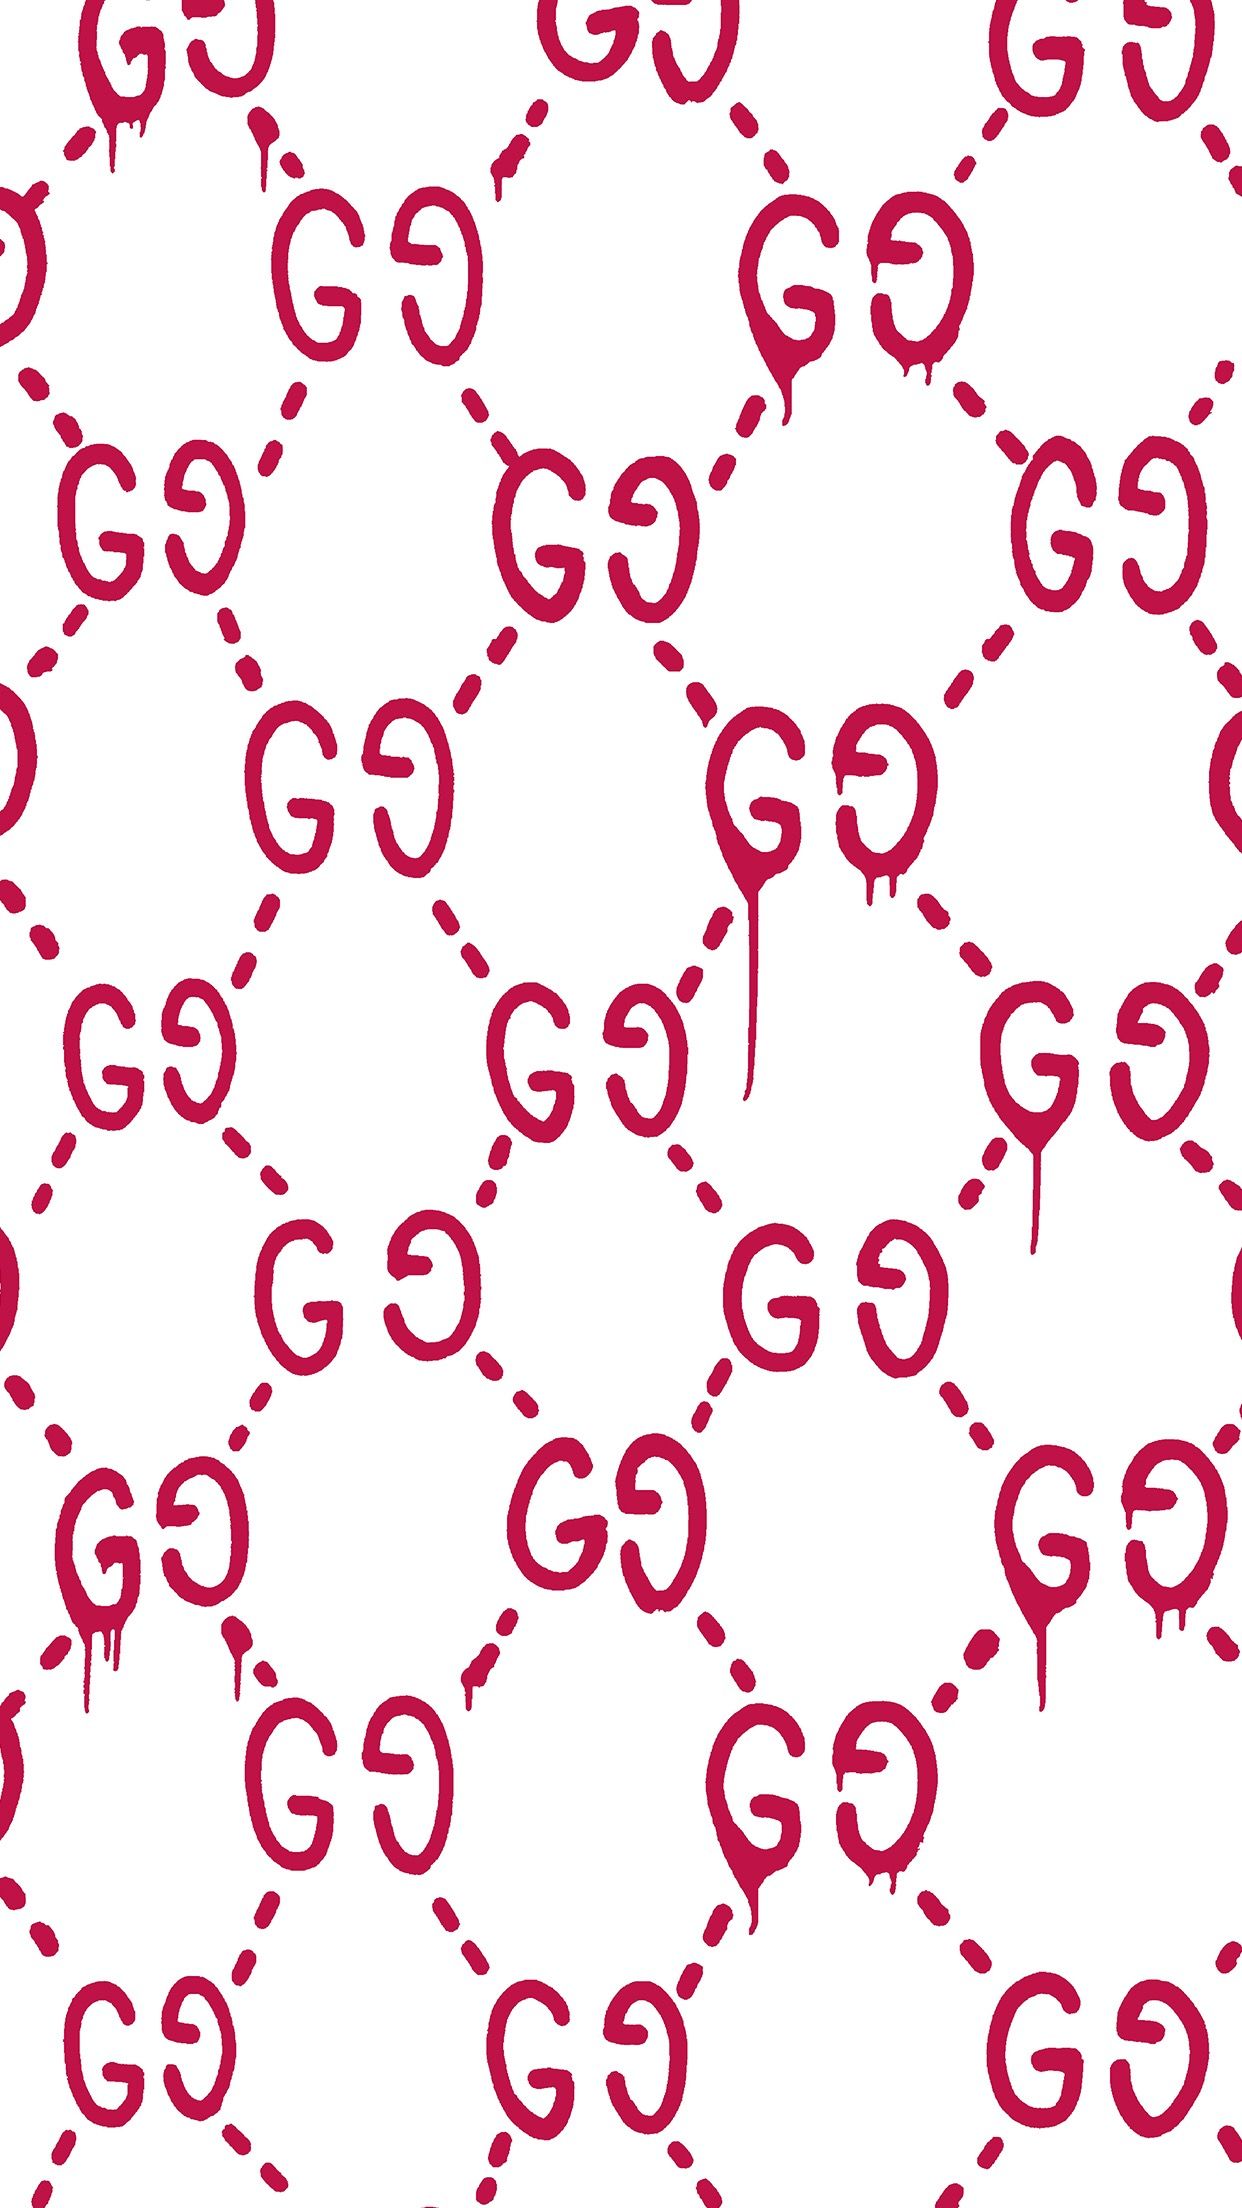 Pin by sweetlovely_81 on GUCCI  Gucci pattern, Monogram wallpaper